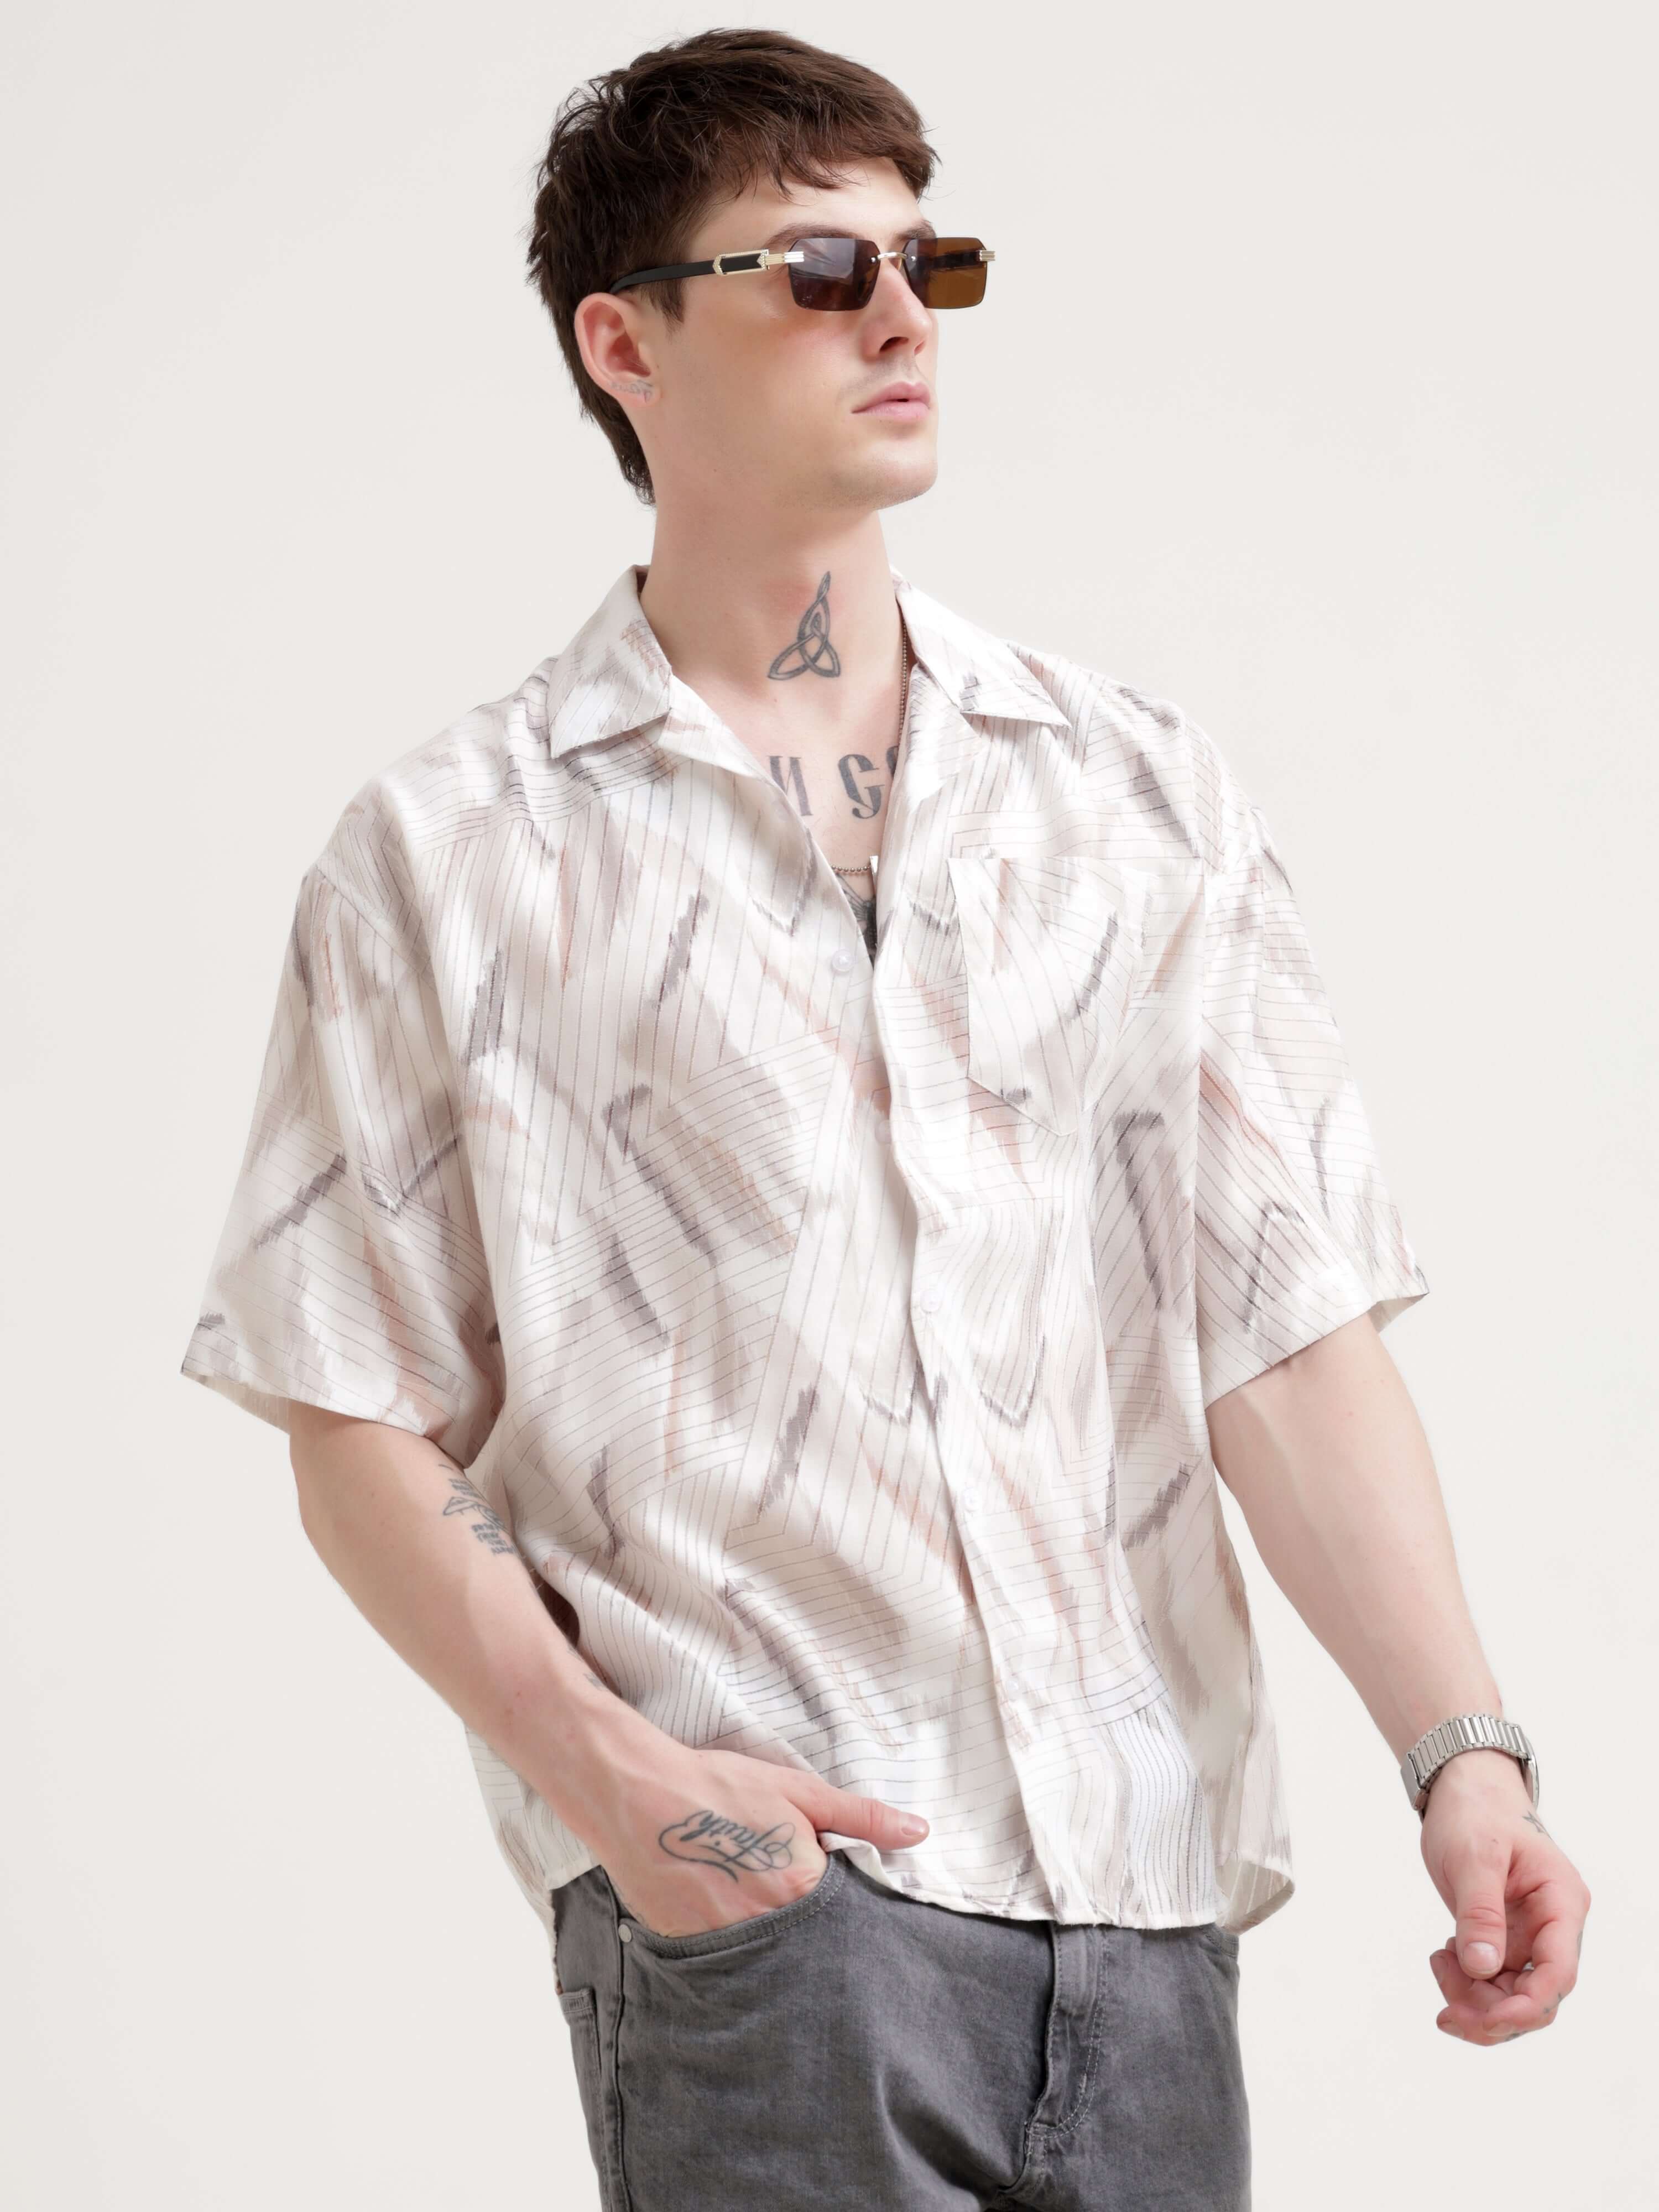 Unique vision brown crochet oversized shirt - Men's Casual Wear shop online at Estilocus. Embrace summer with our Unique Vision Brown Crochet Oversized Shirt. Perfect for a relaxed, streetwear vibe with a comfortable, lightweight fit.